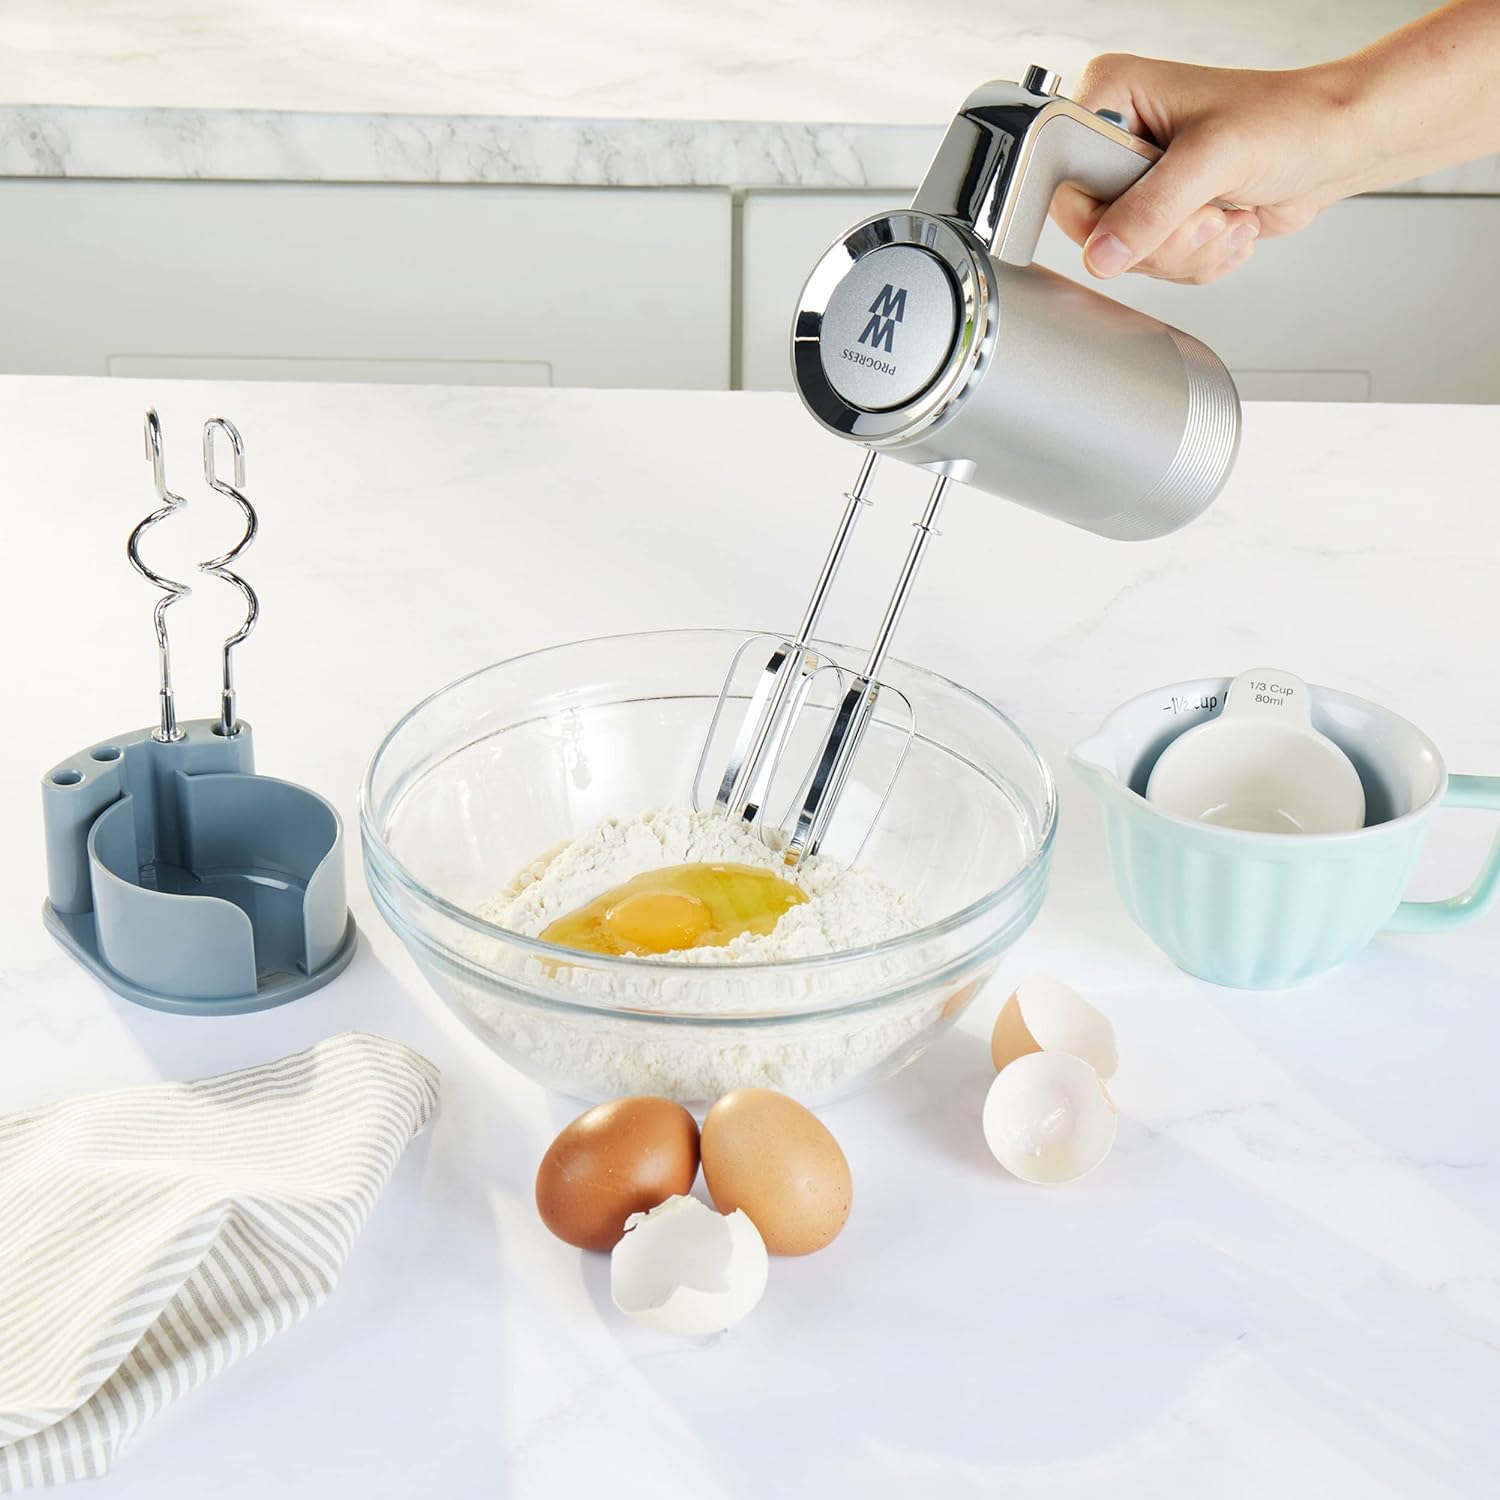 Progress by WW EK5250WW Hand Mixer, Easy - Store, Dough Hooks & Mixing Beaters, 5 Speed Settings, Baking/Cooking, Whisk, Bread, Muffins, Salad Dressings, Omelettes, Storage Base Included, 300 W - Amazing Gadgets Outlet